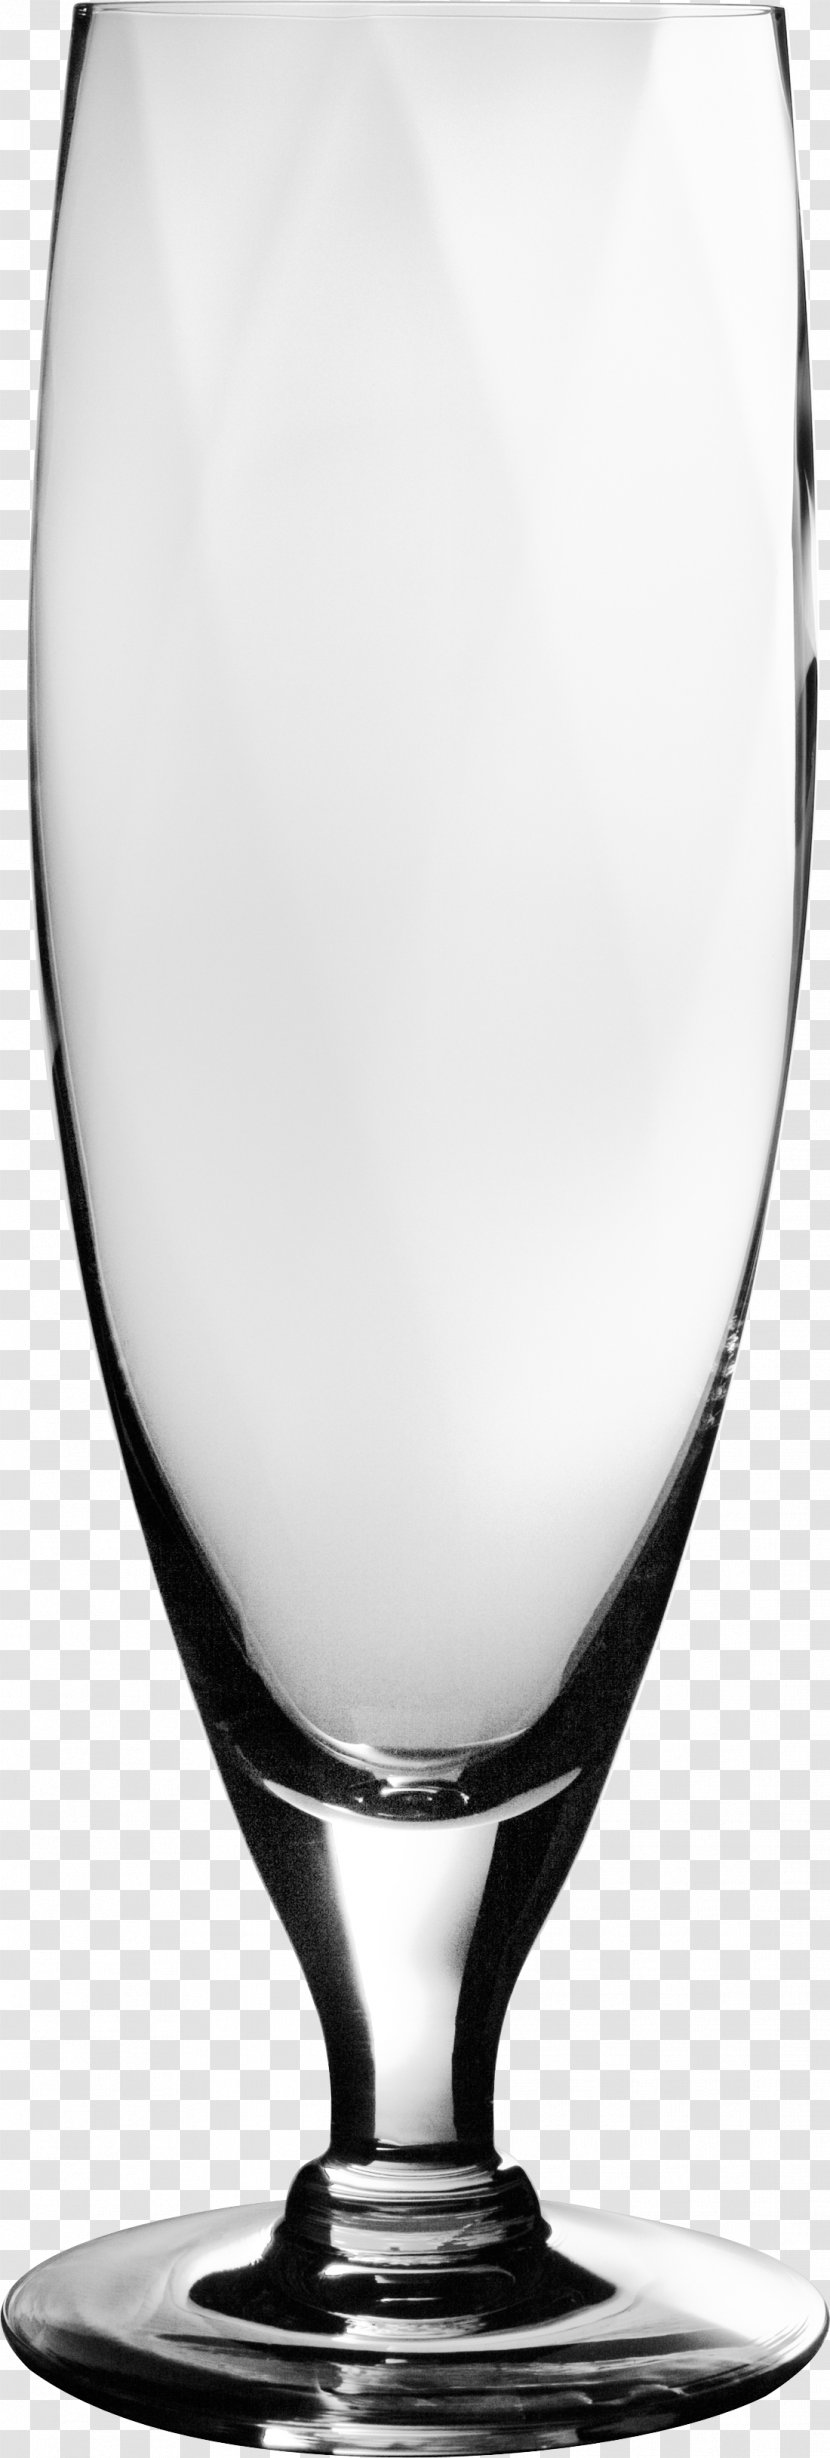 Glass - Crystal - Empty Wine Image Transparent PNG